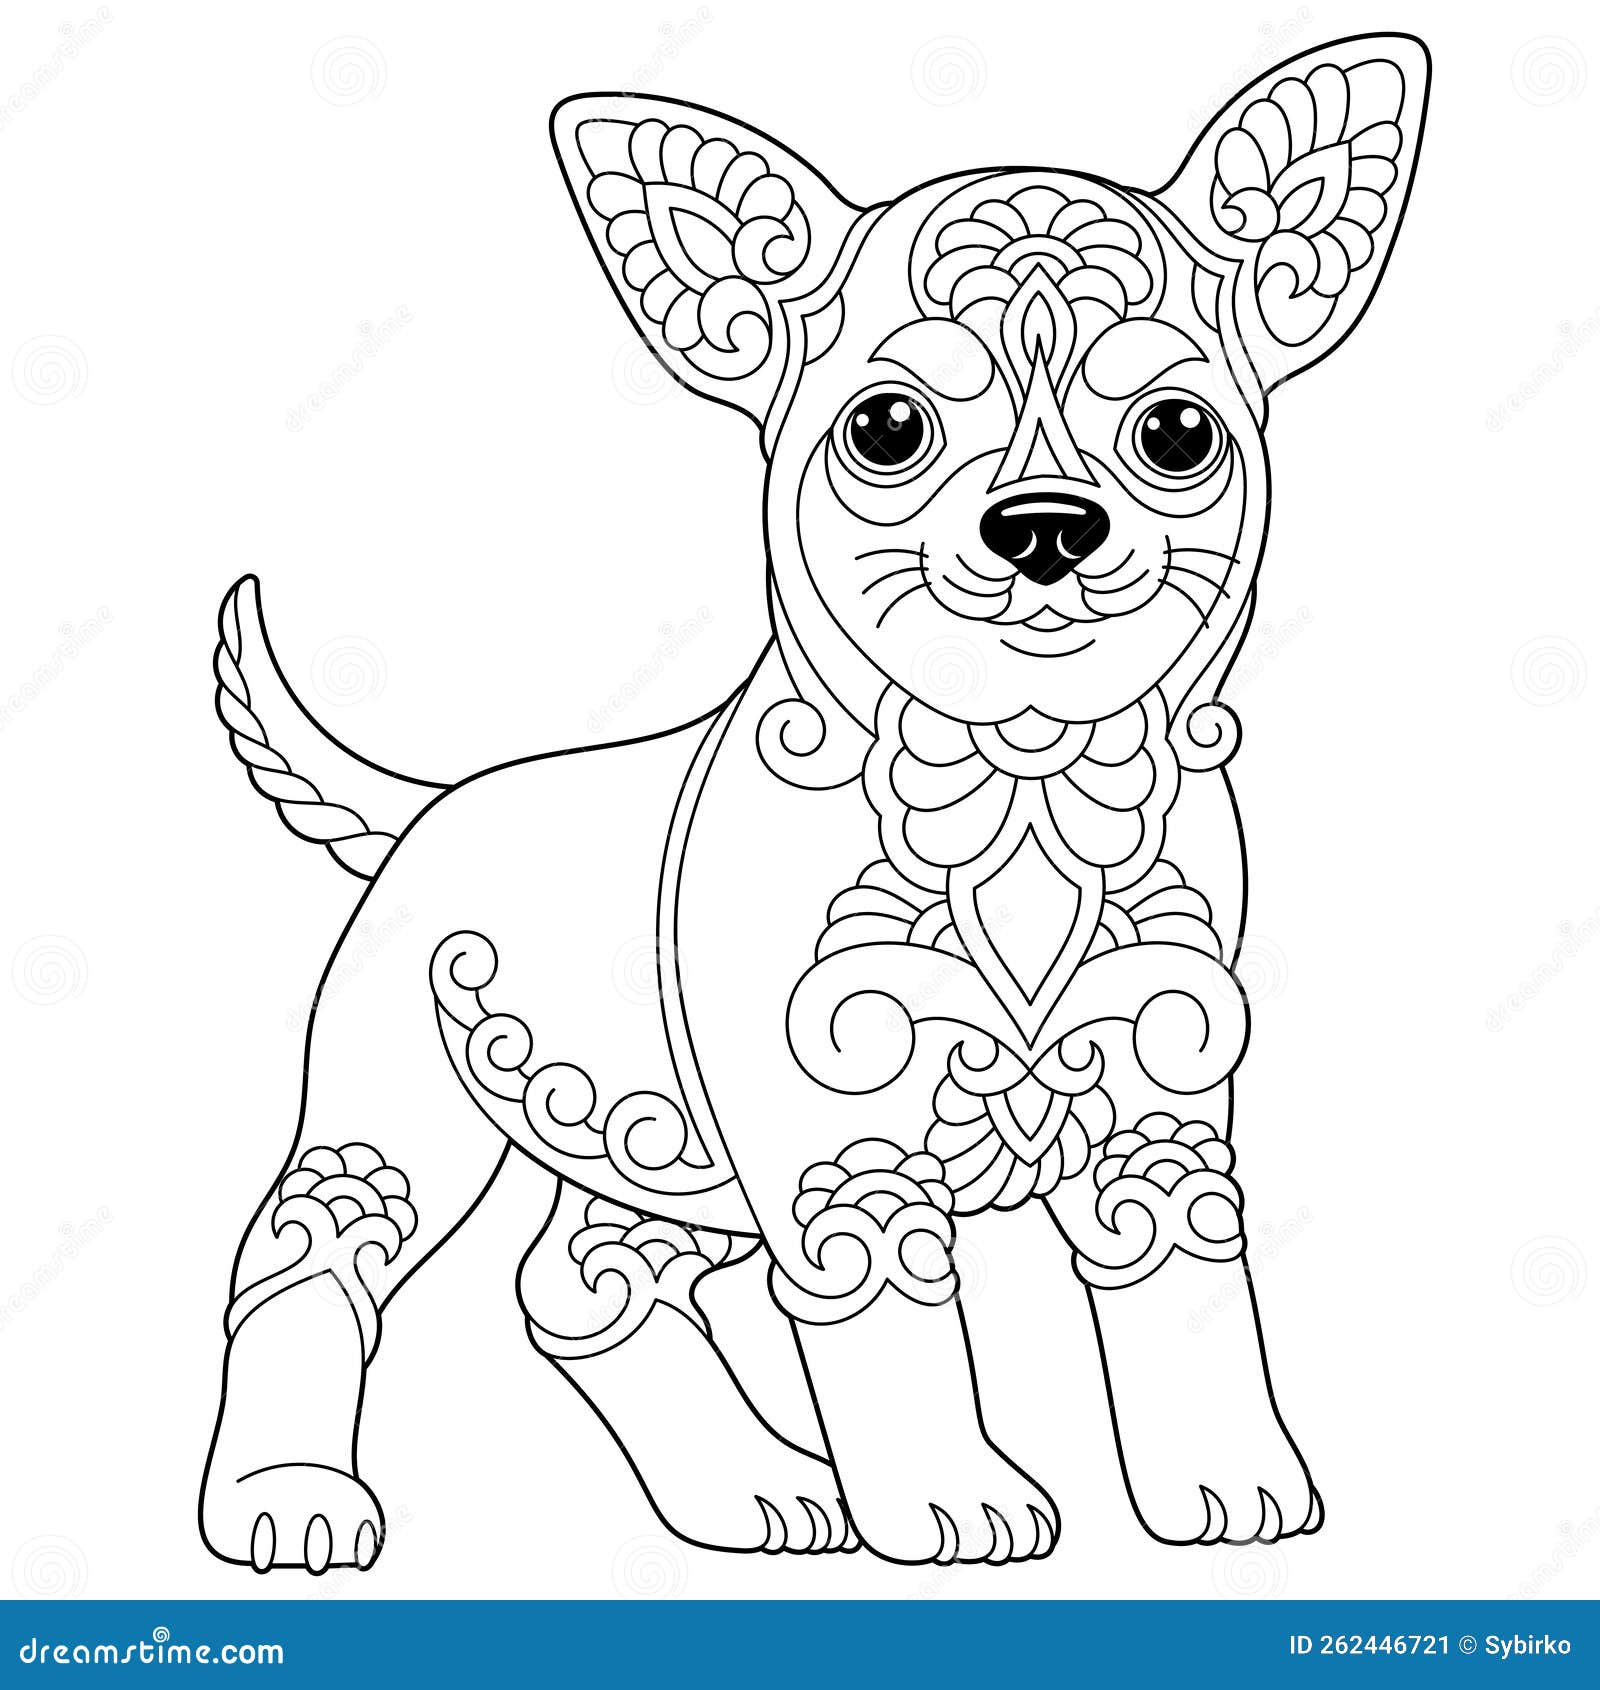 Chihuahua Dog Coloring Page Colored Illustration Cartoon Vector ...